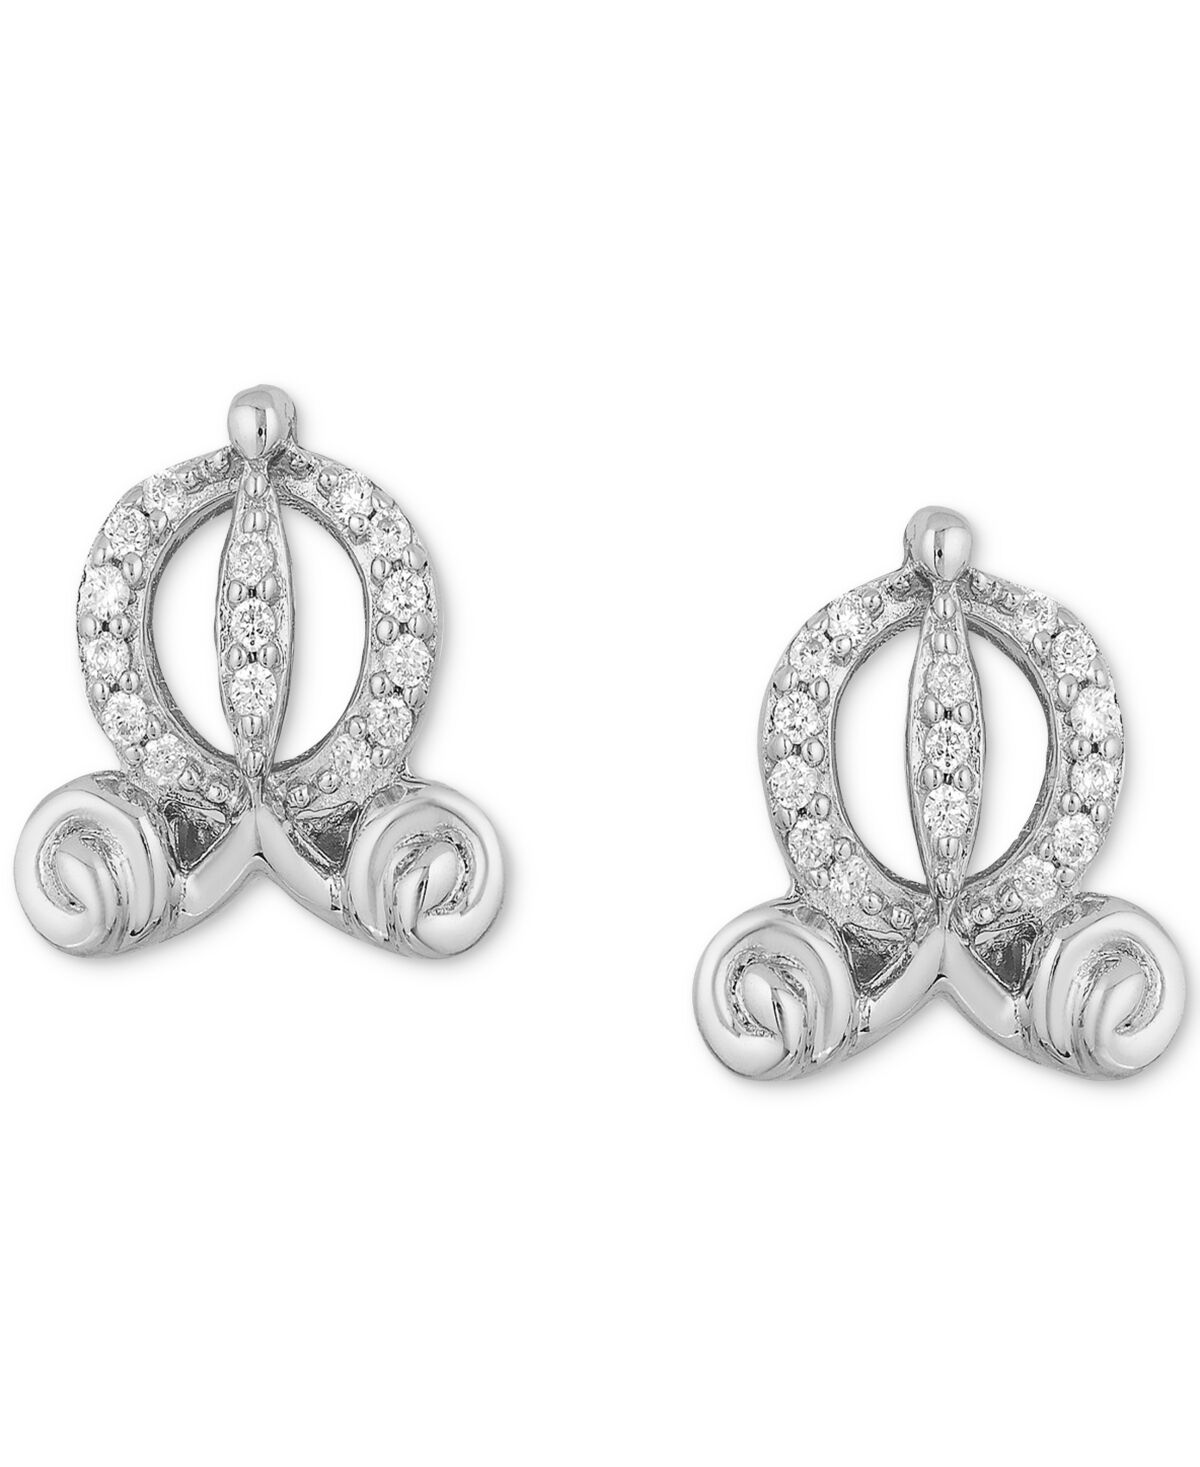 Disney Enchanted Disney Fine Jewelry Diamond Accent Cinderella Carriage Stud Earrings in Sterling Silver - Sterling Silver